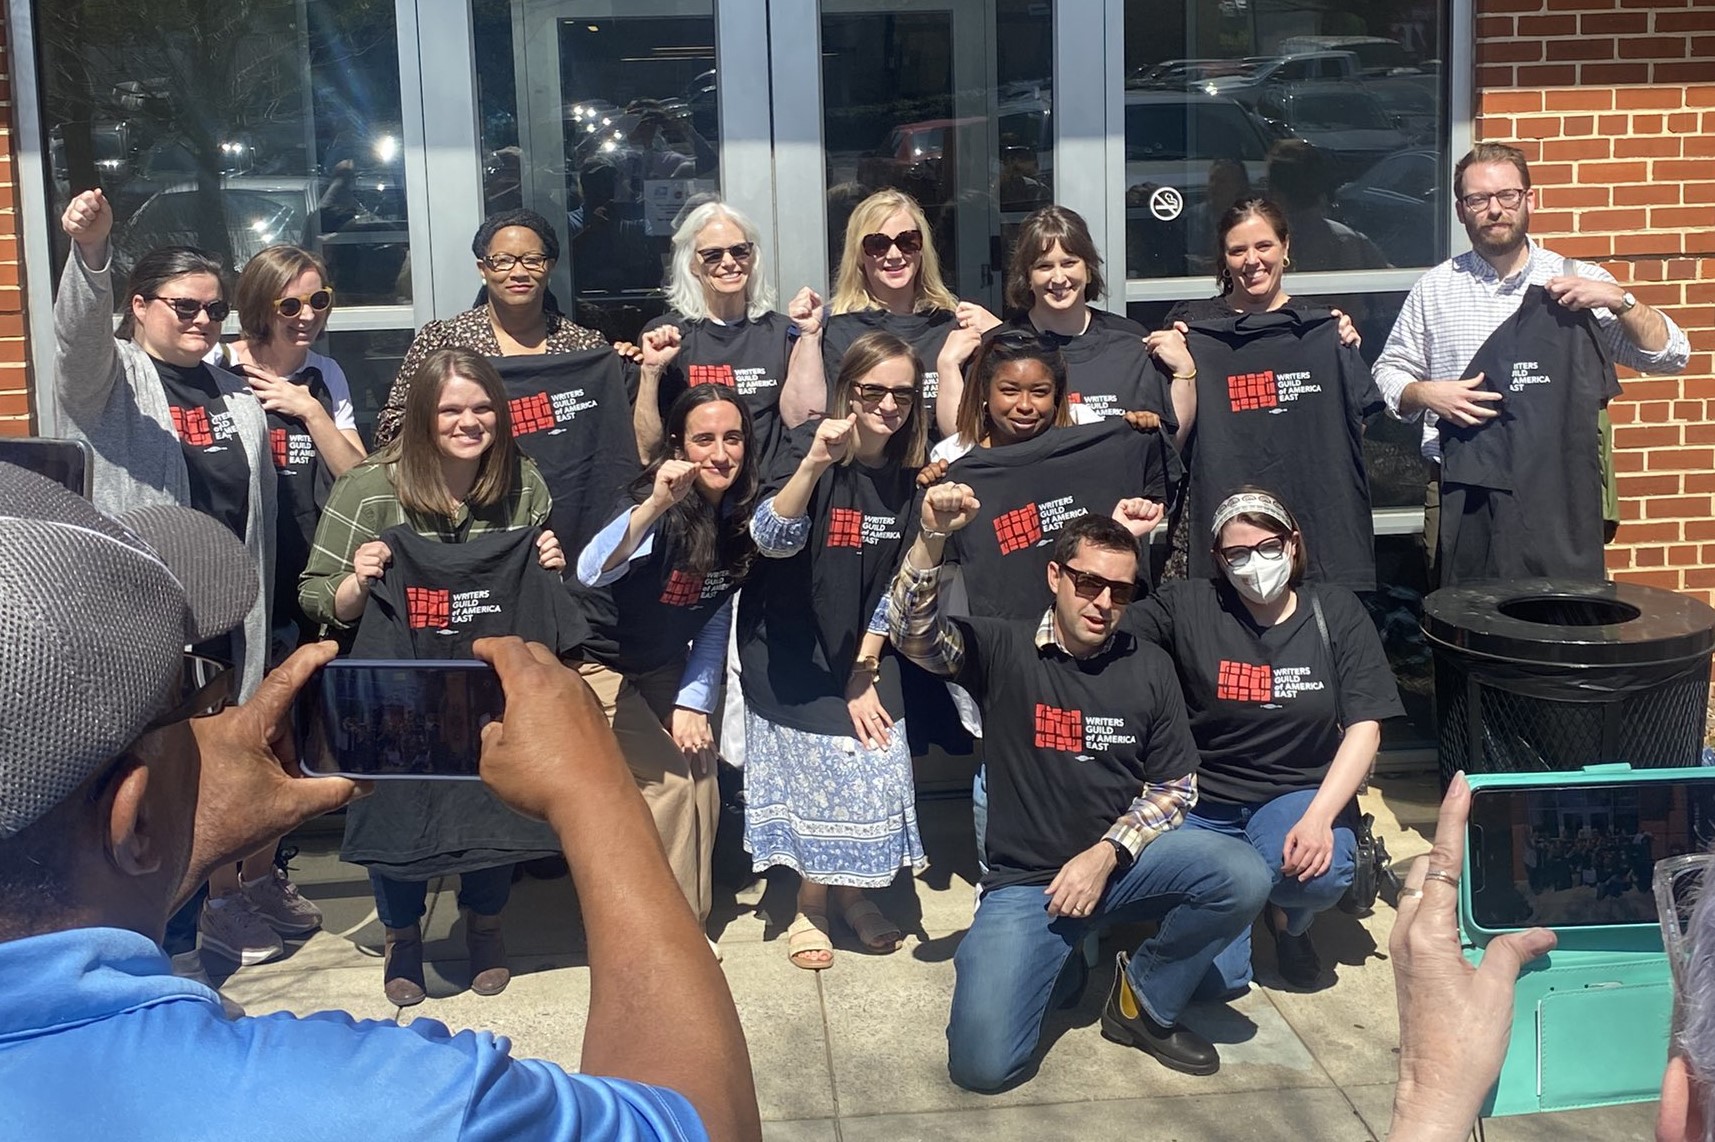 Hearst Union workers at Country Living and Veranda magazines pose for a picture on with Writers Guild of America, East T-shirts during their Thursday, March 23, 2023 walkout from their office at Birmingham's Pepper Place.